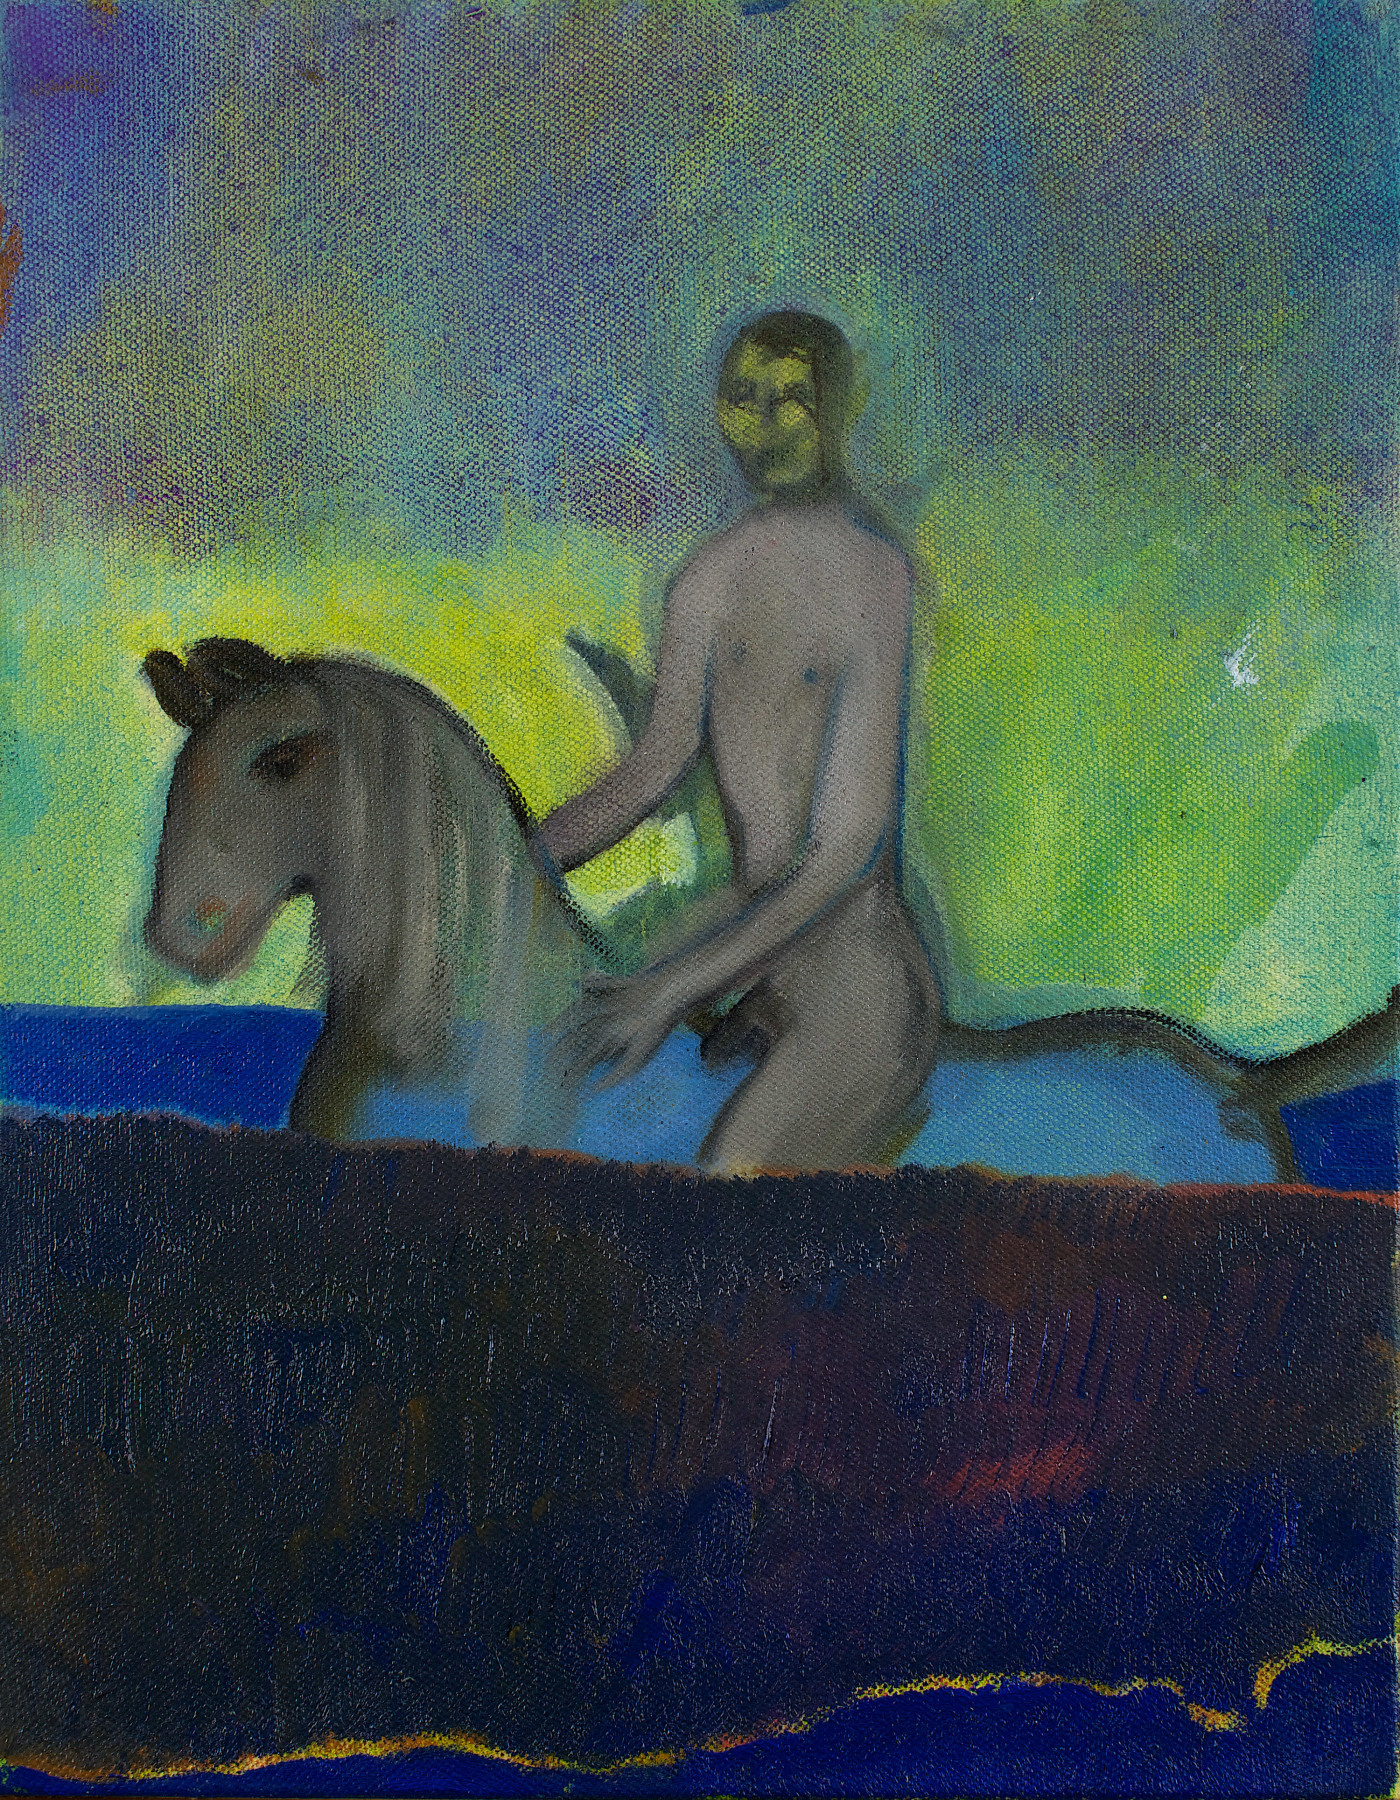 &quot;Riding in Water (Blue)&quot;, 2012